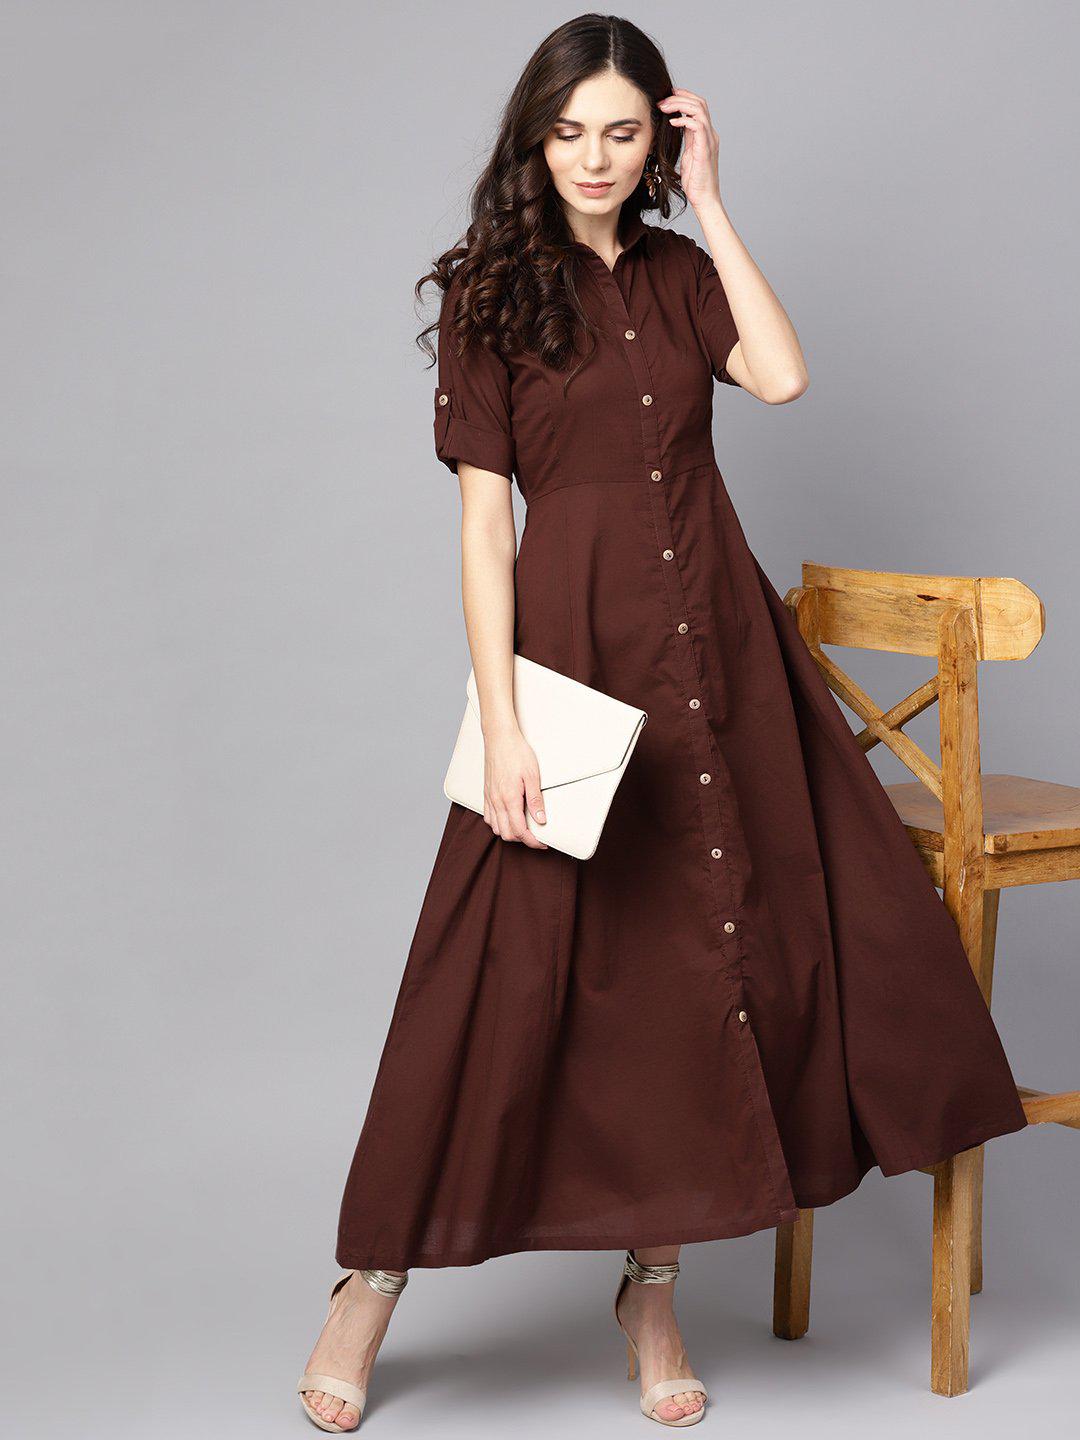 solid-chocolate-brown-maxi-dress-10804006BR, Women Clothing, Cotton Dress